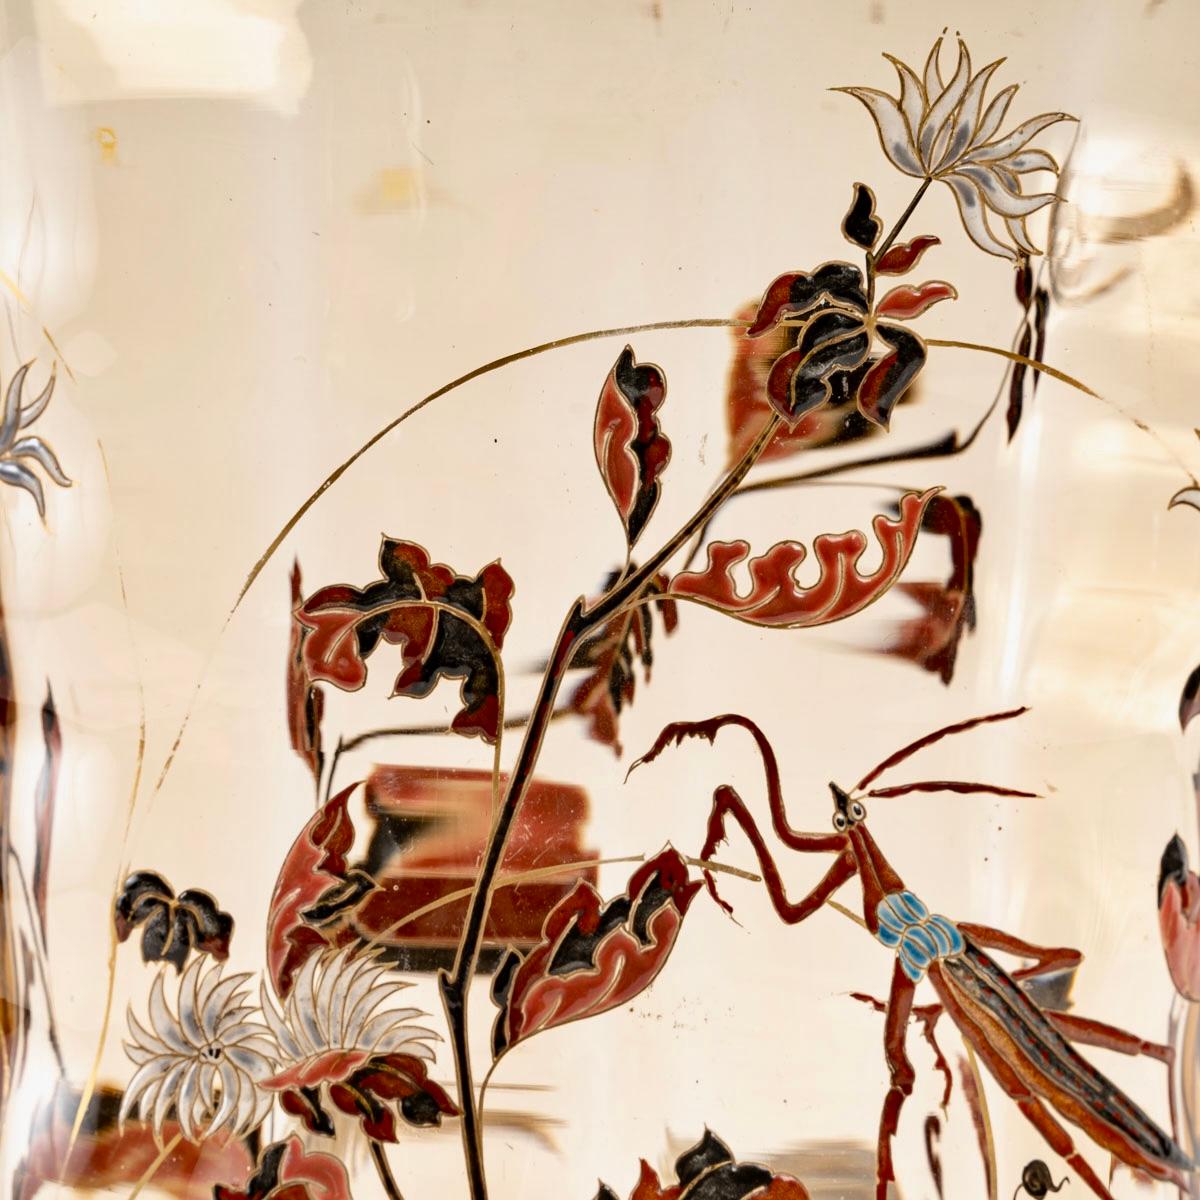 Vase Cristallerie made in smoked glass decorated with a praying mantis in foliages.
Signature under the base.

Perfect condition. Superb enamel !

Measures: height: 31.5 cm
diameter: 23 cm.